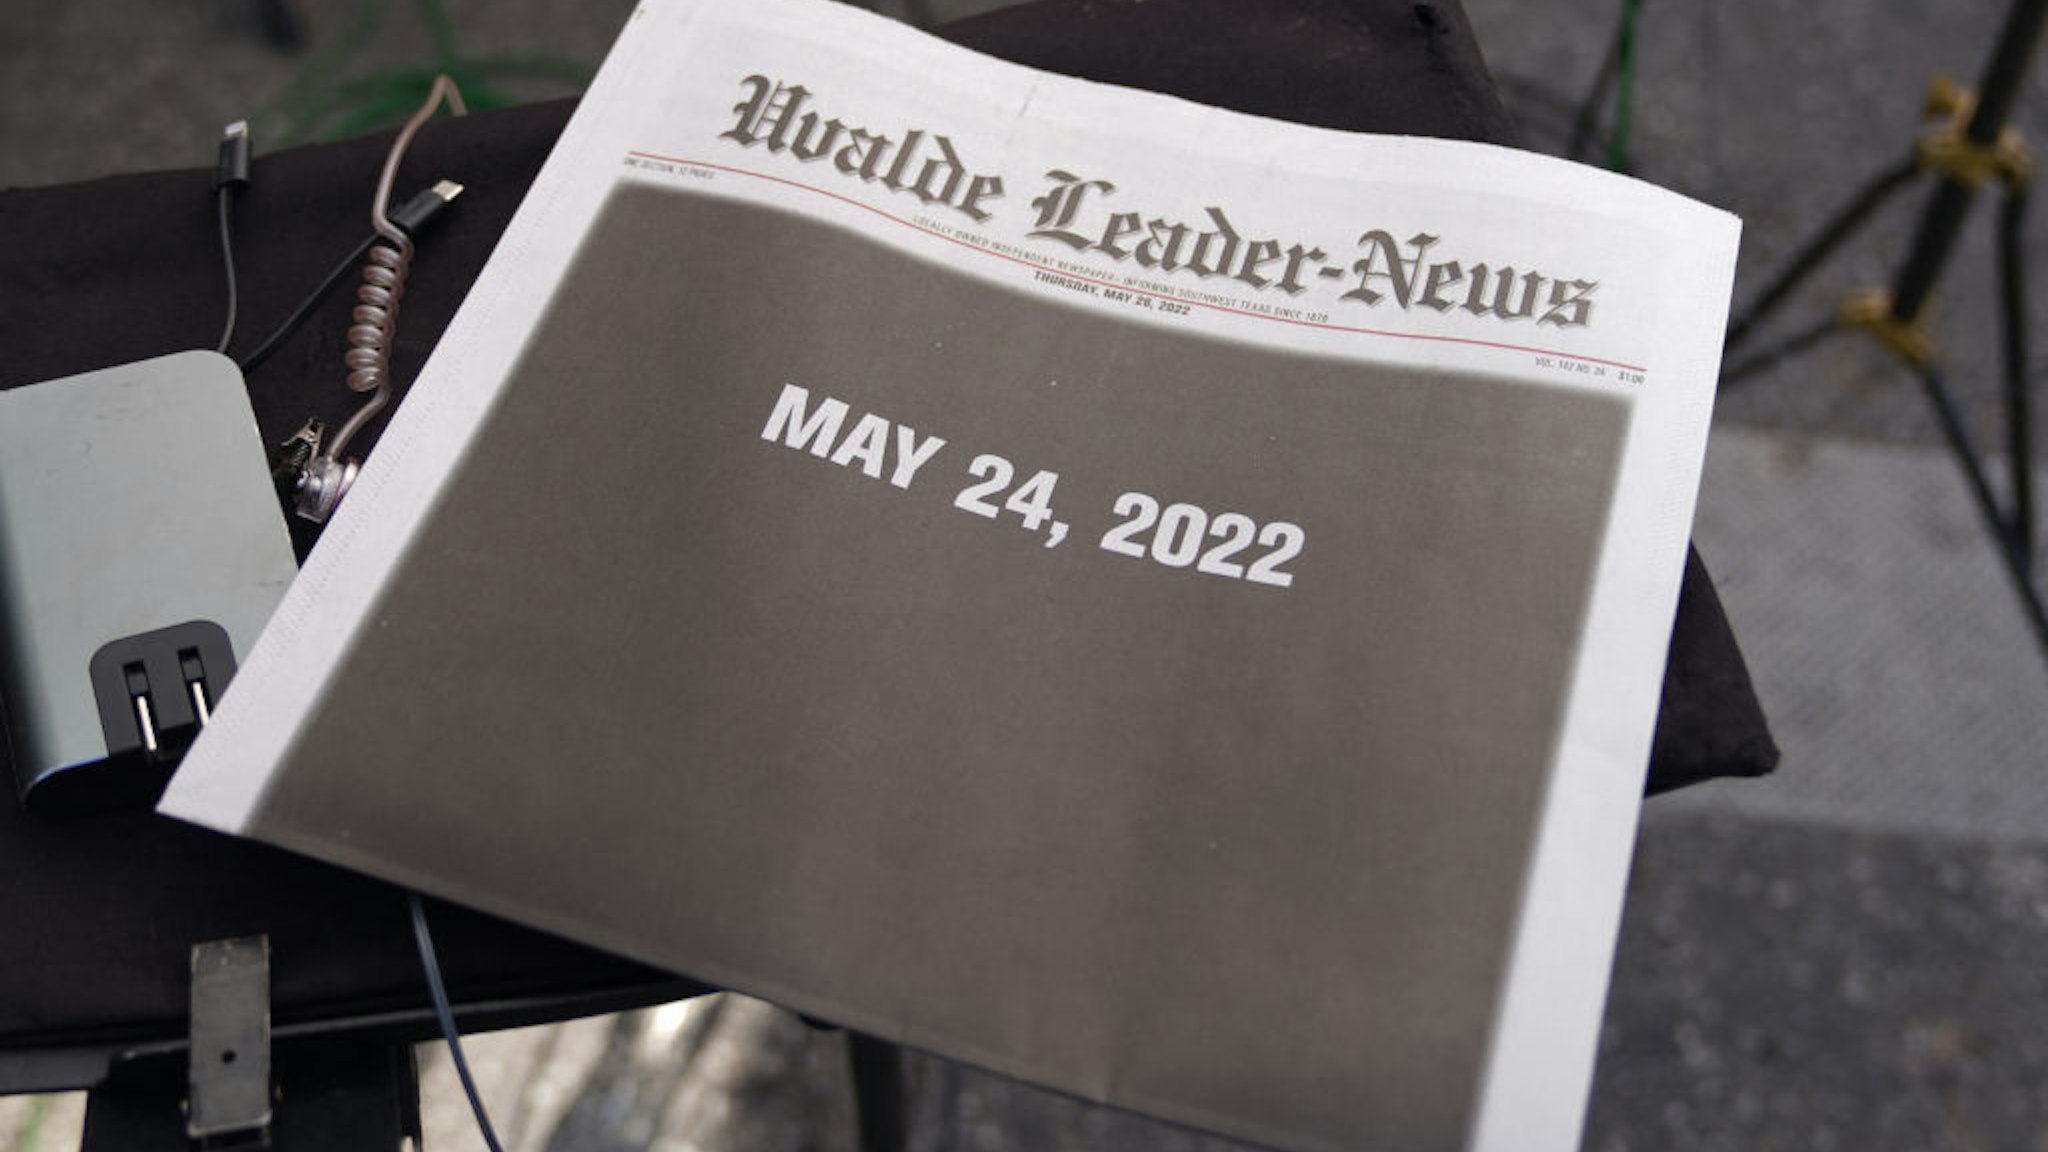 The front page of the local newspaper is seen in the media area outside the Robb Elementary School in Uvalde, Texas on May 26, 2022. - Grief at the massacre of 19 children at the elementary school in Texas spilled into confrontation on May 25, as angry questions mounted over gun control -- and whether this latest tragedy could have been prevented. The tight-knit Latino community of Uvalde on May 24 became the site of the worst school shooting in a decade, committed by a disturbed 18-year-old armed with a legally bought assault rifle. (Photo by allison dinner / AFP) (Photo by ALLISON DINNER/AFP via Getty Images)